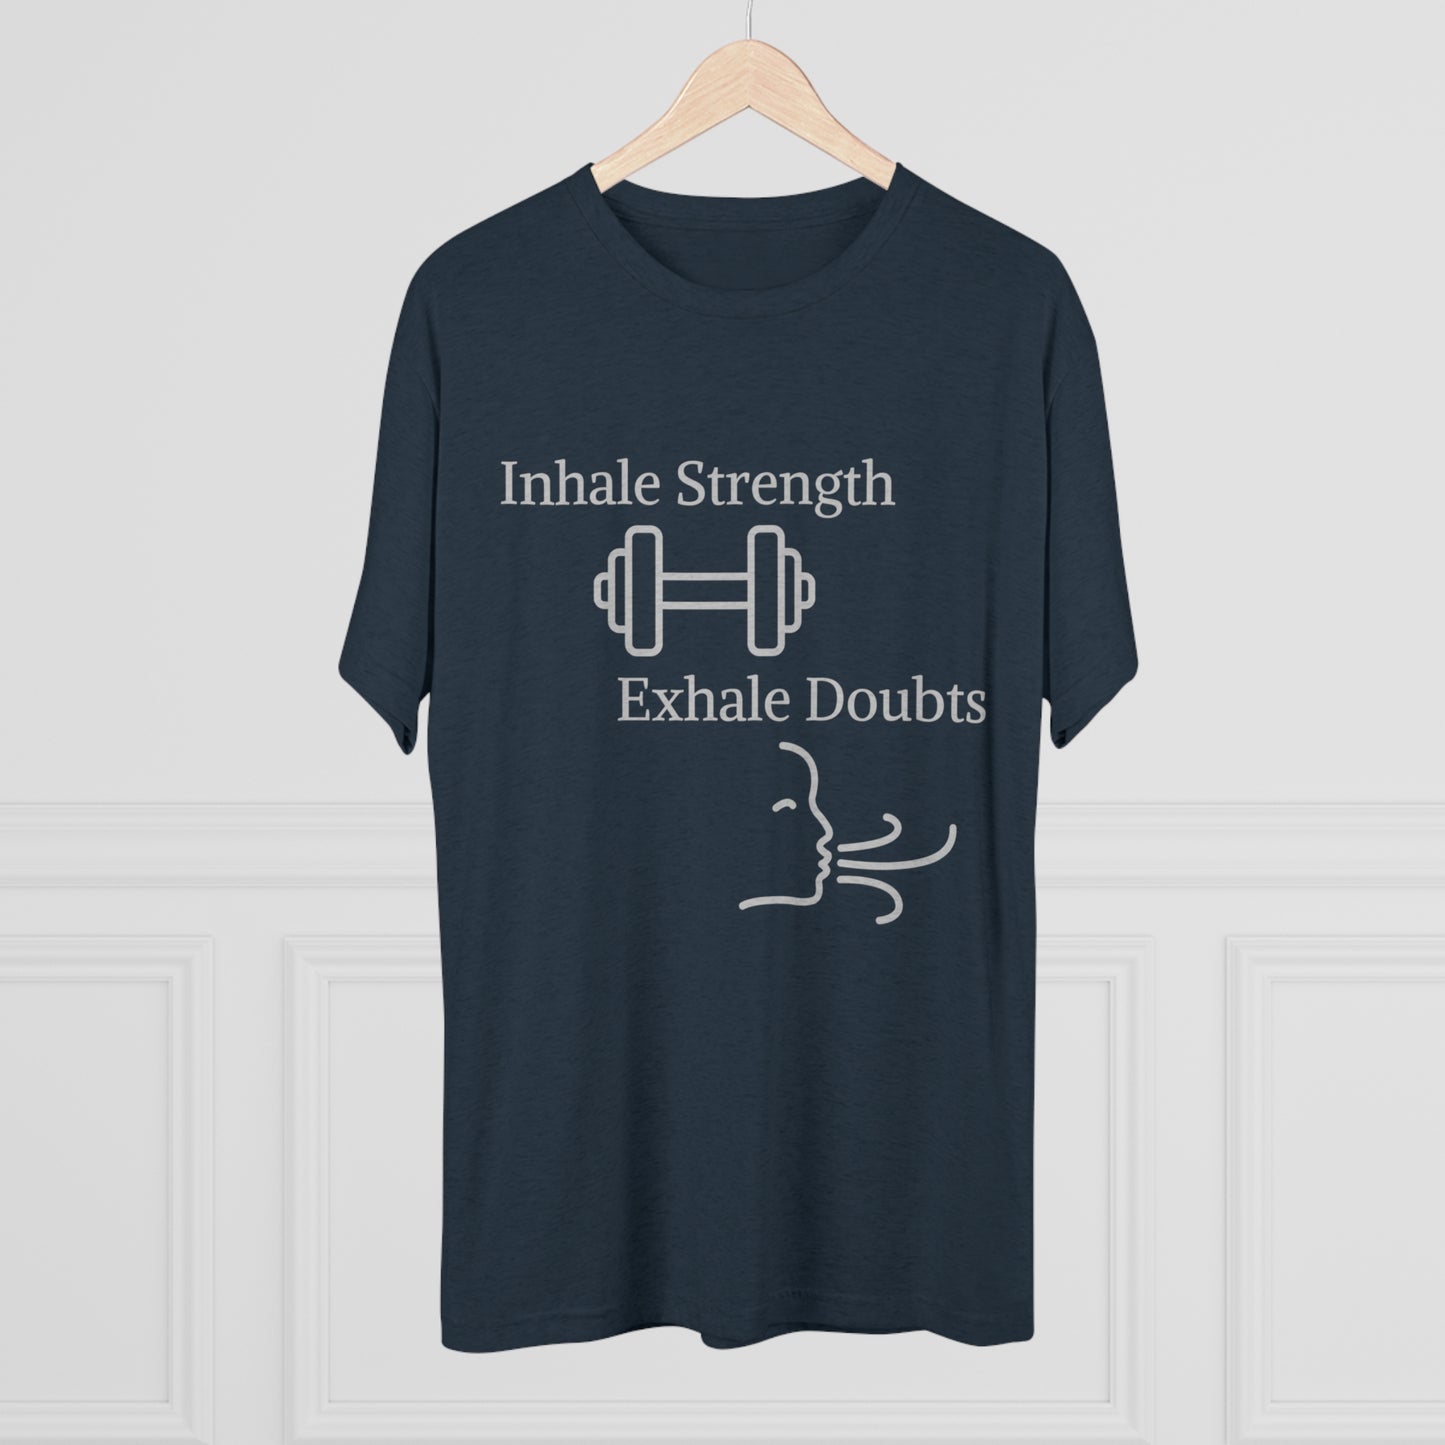 Inhale Strength Exhale Doubt w Images - Unisex Tri-Blend Crew Tee